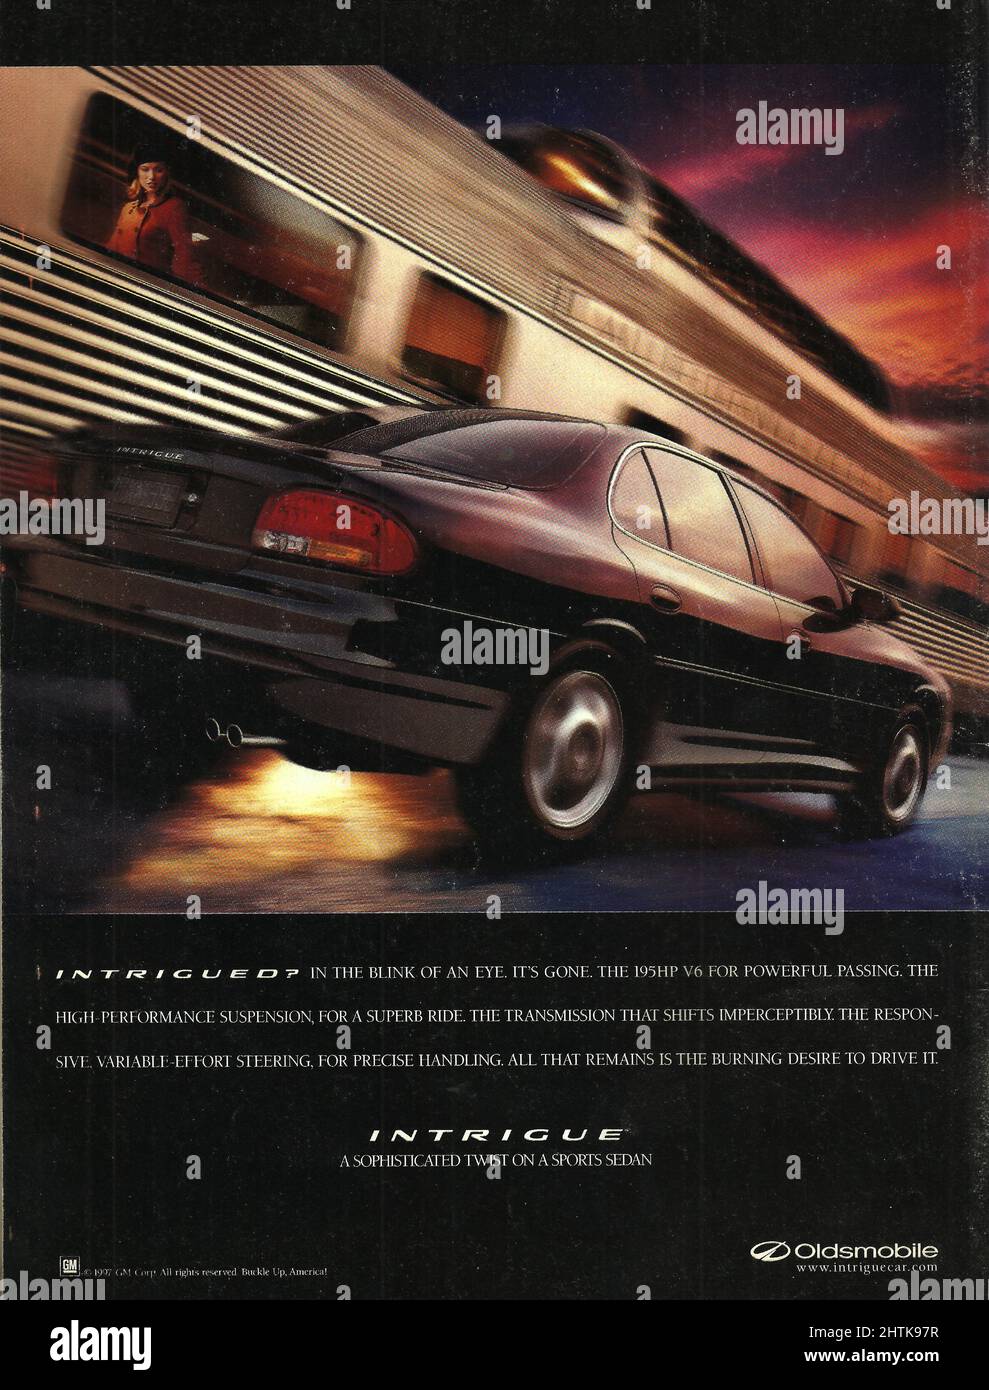 Oldsmobile Intrigue car paper advertisement advert 1990s Stock Photo